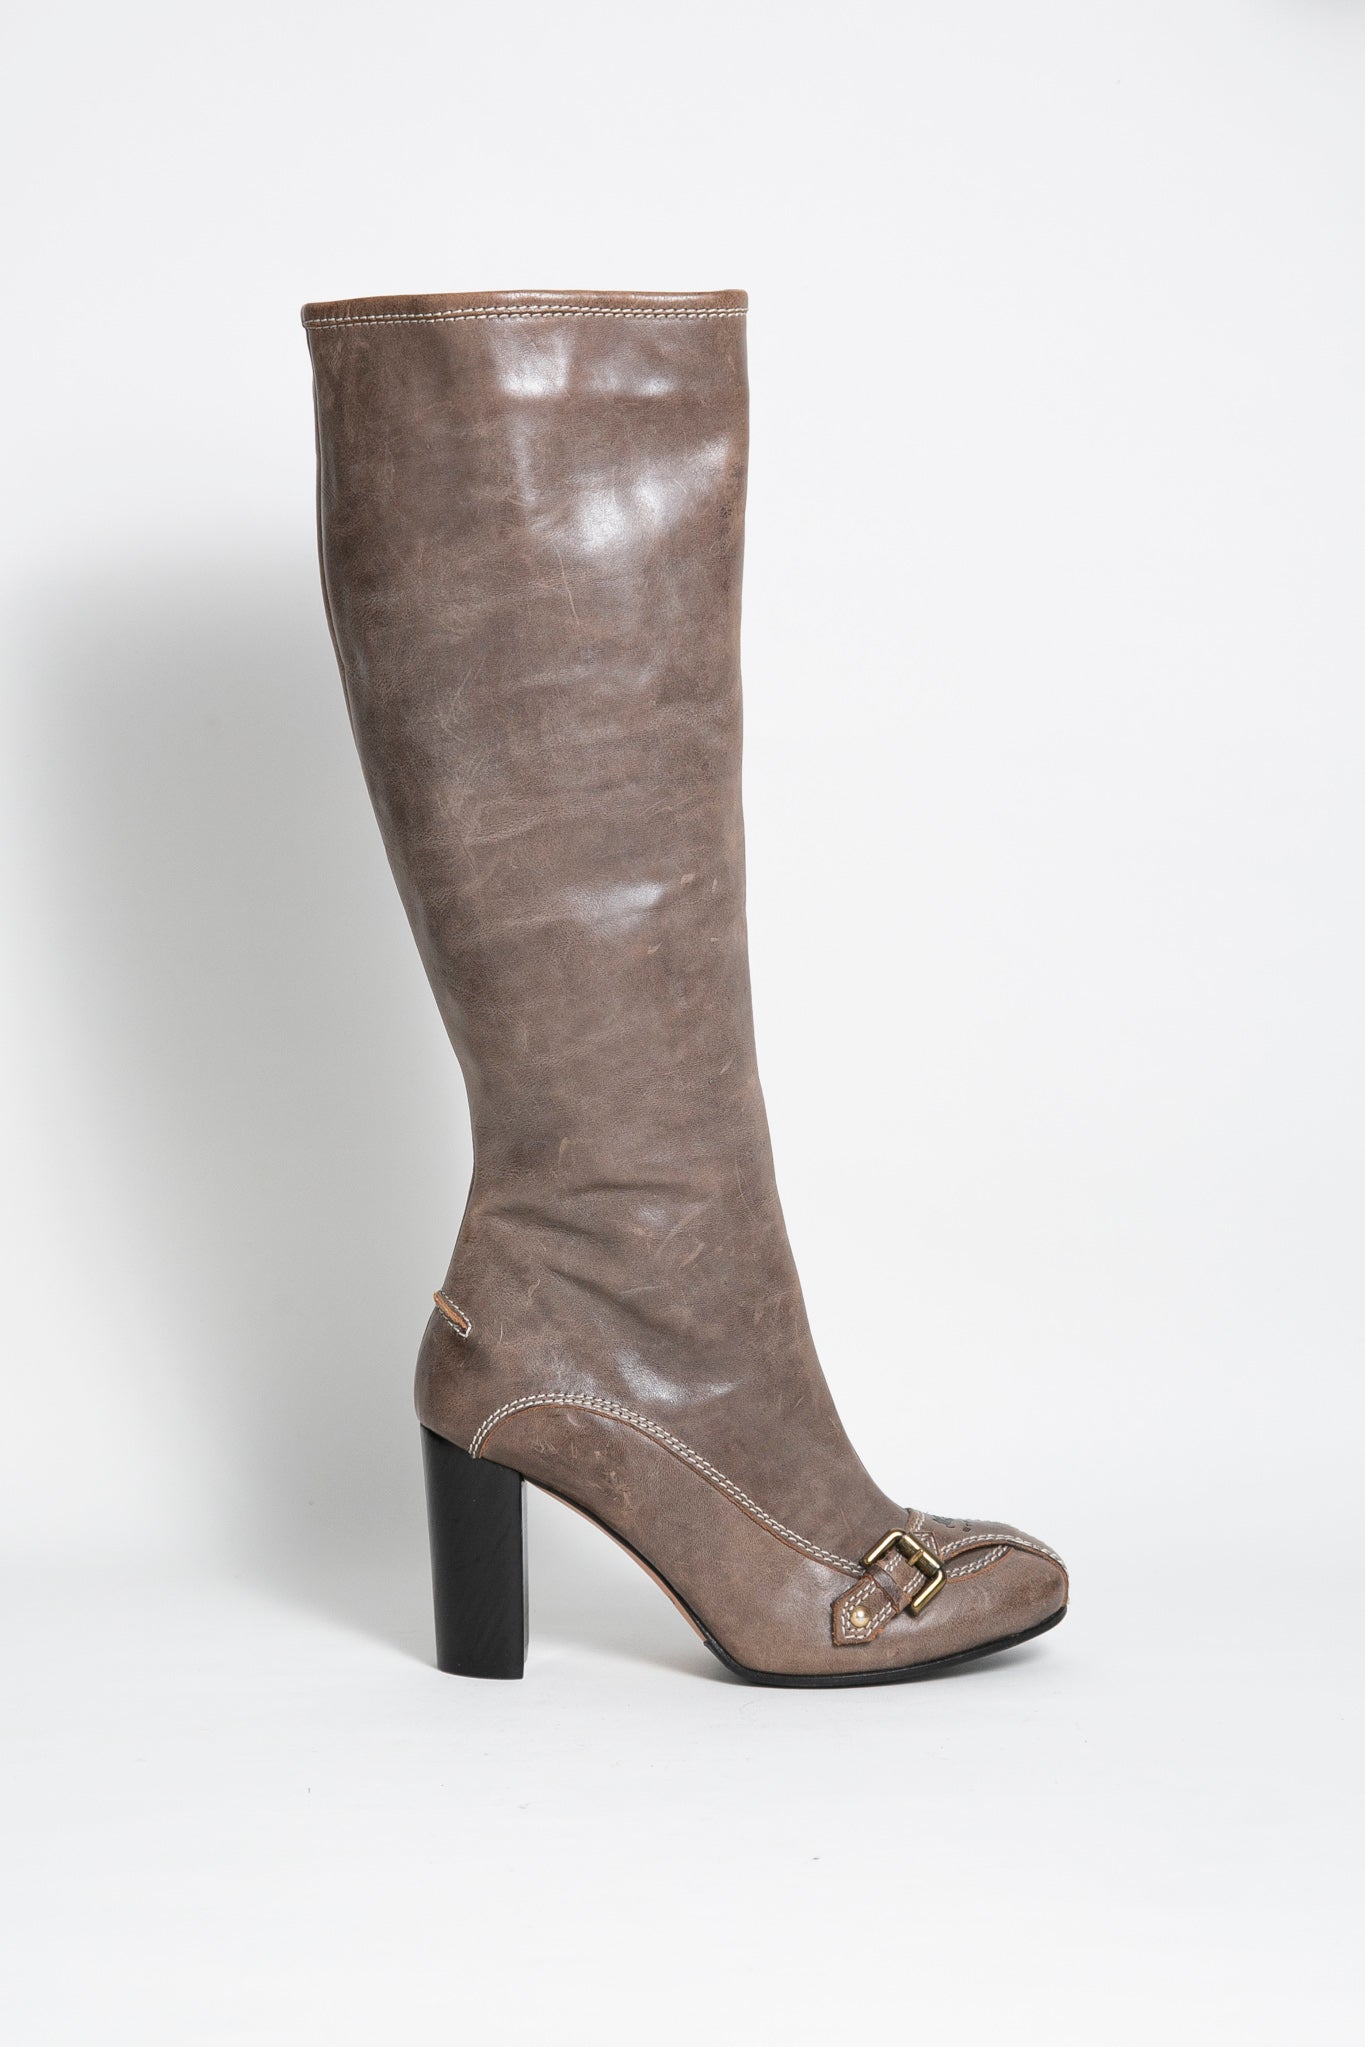 Etro 2010 Knee Buckled Boots